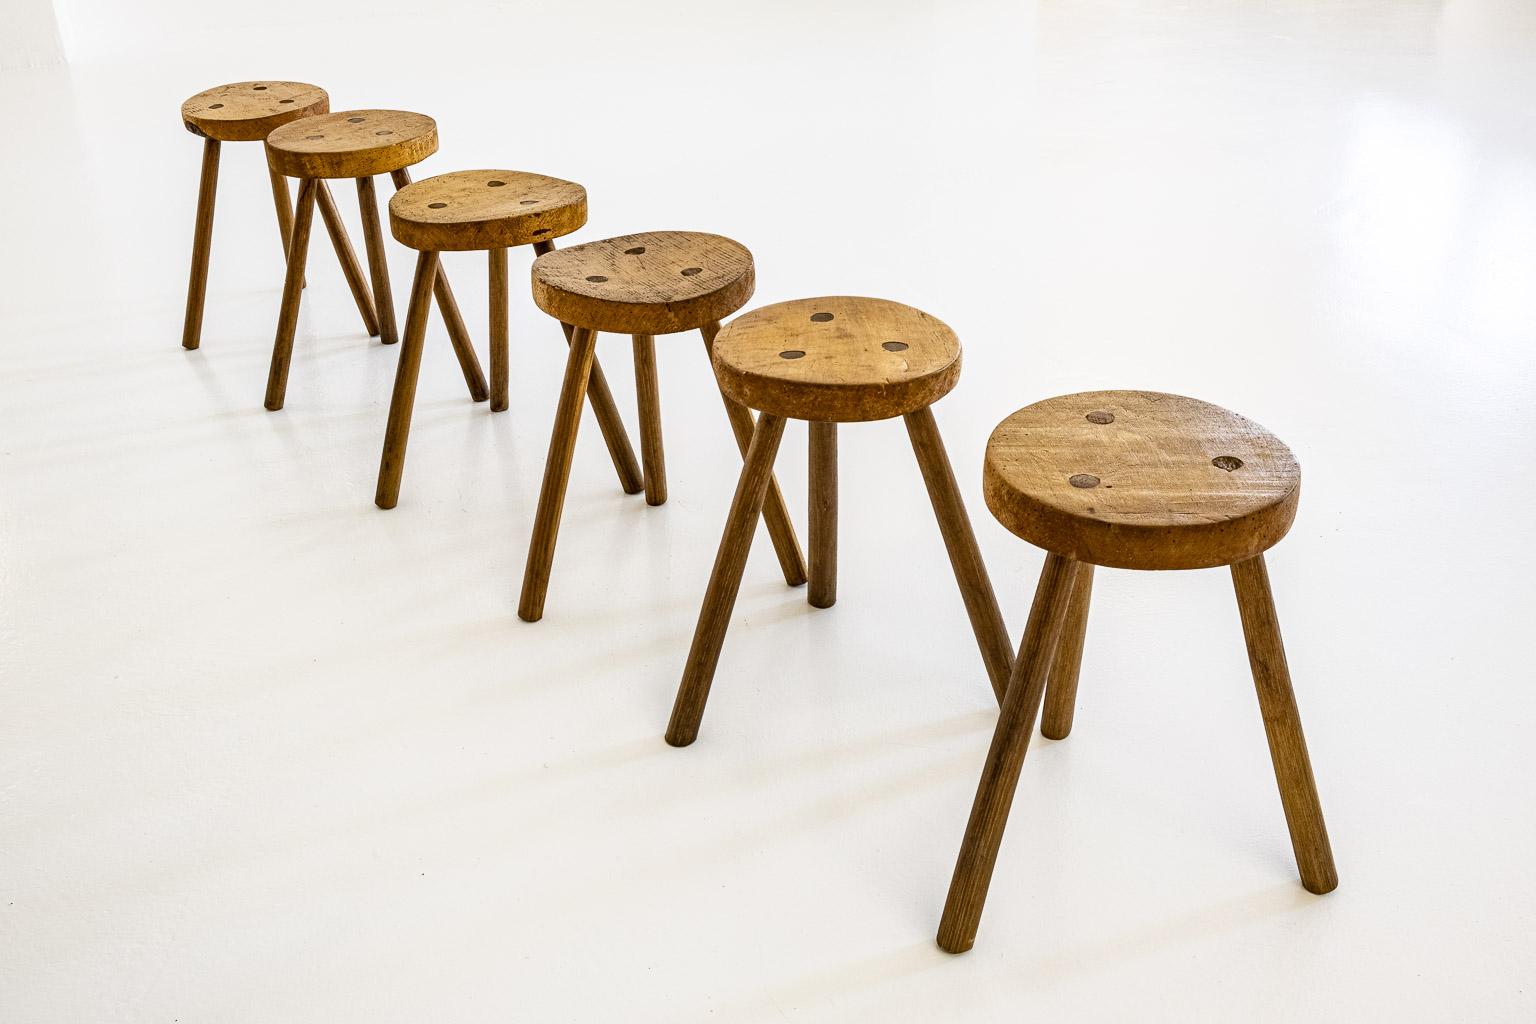 Set of 6, Wooden, Brutalist Tripod Stools or Side Tables, Italy, ca. 1960s For Sale 6